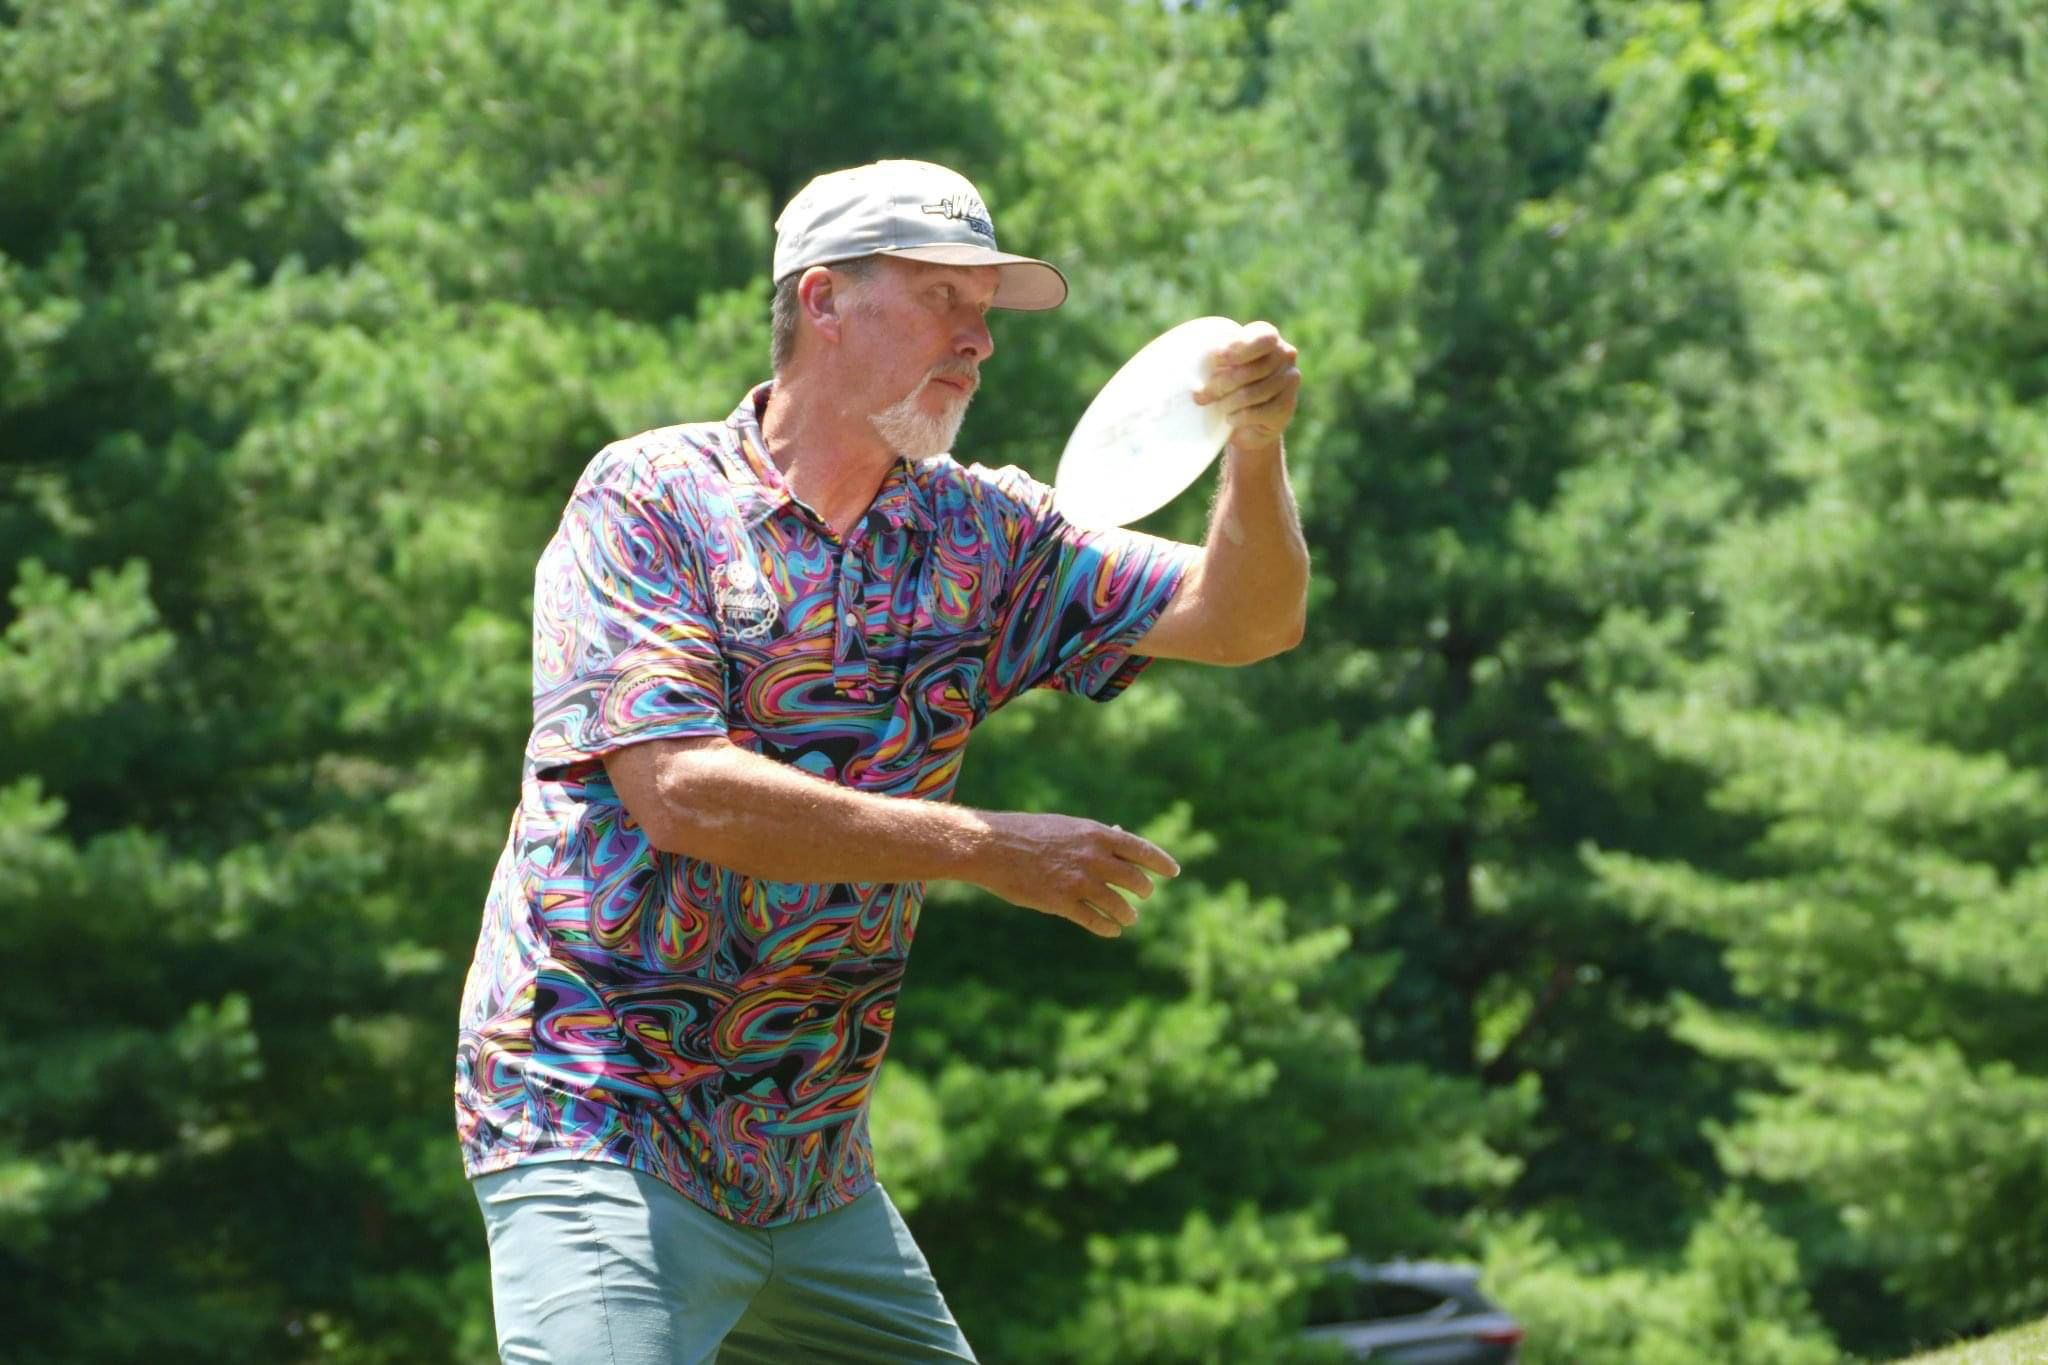 Trussville's Tim Keith wins second world disc golf title in a row